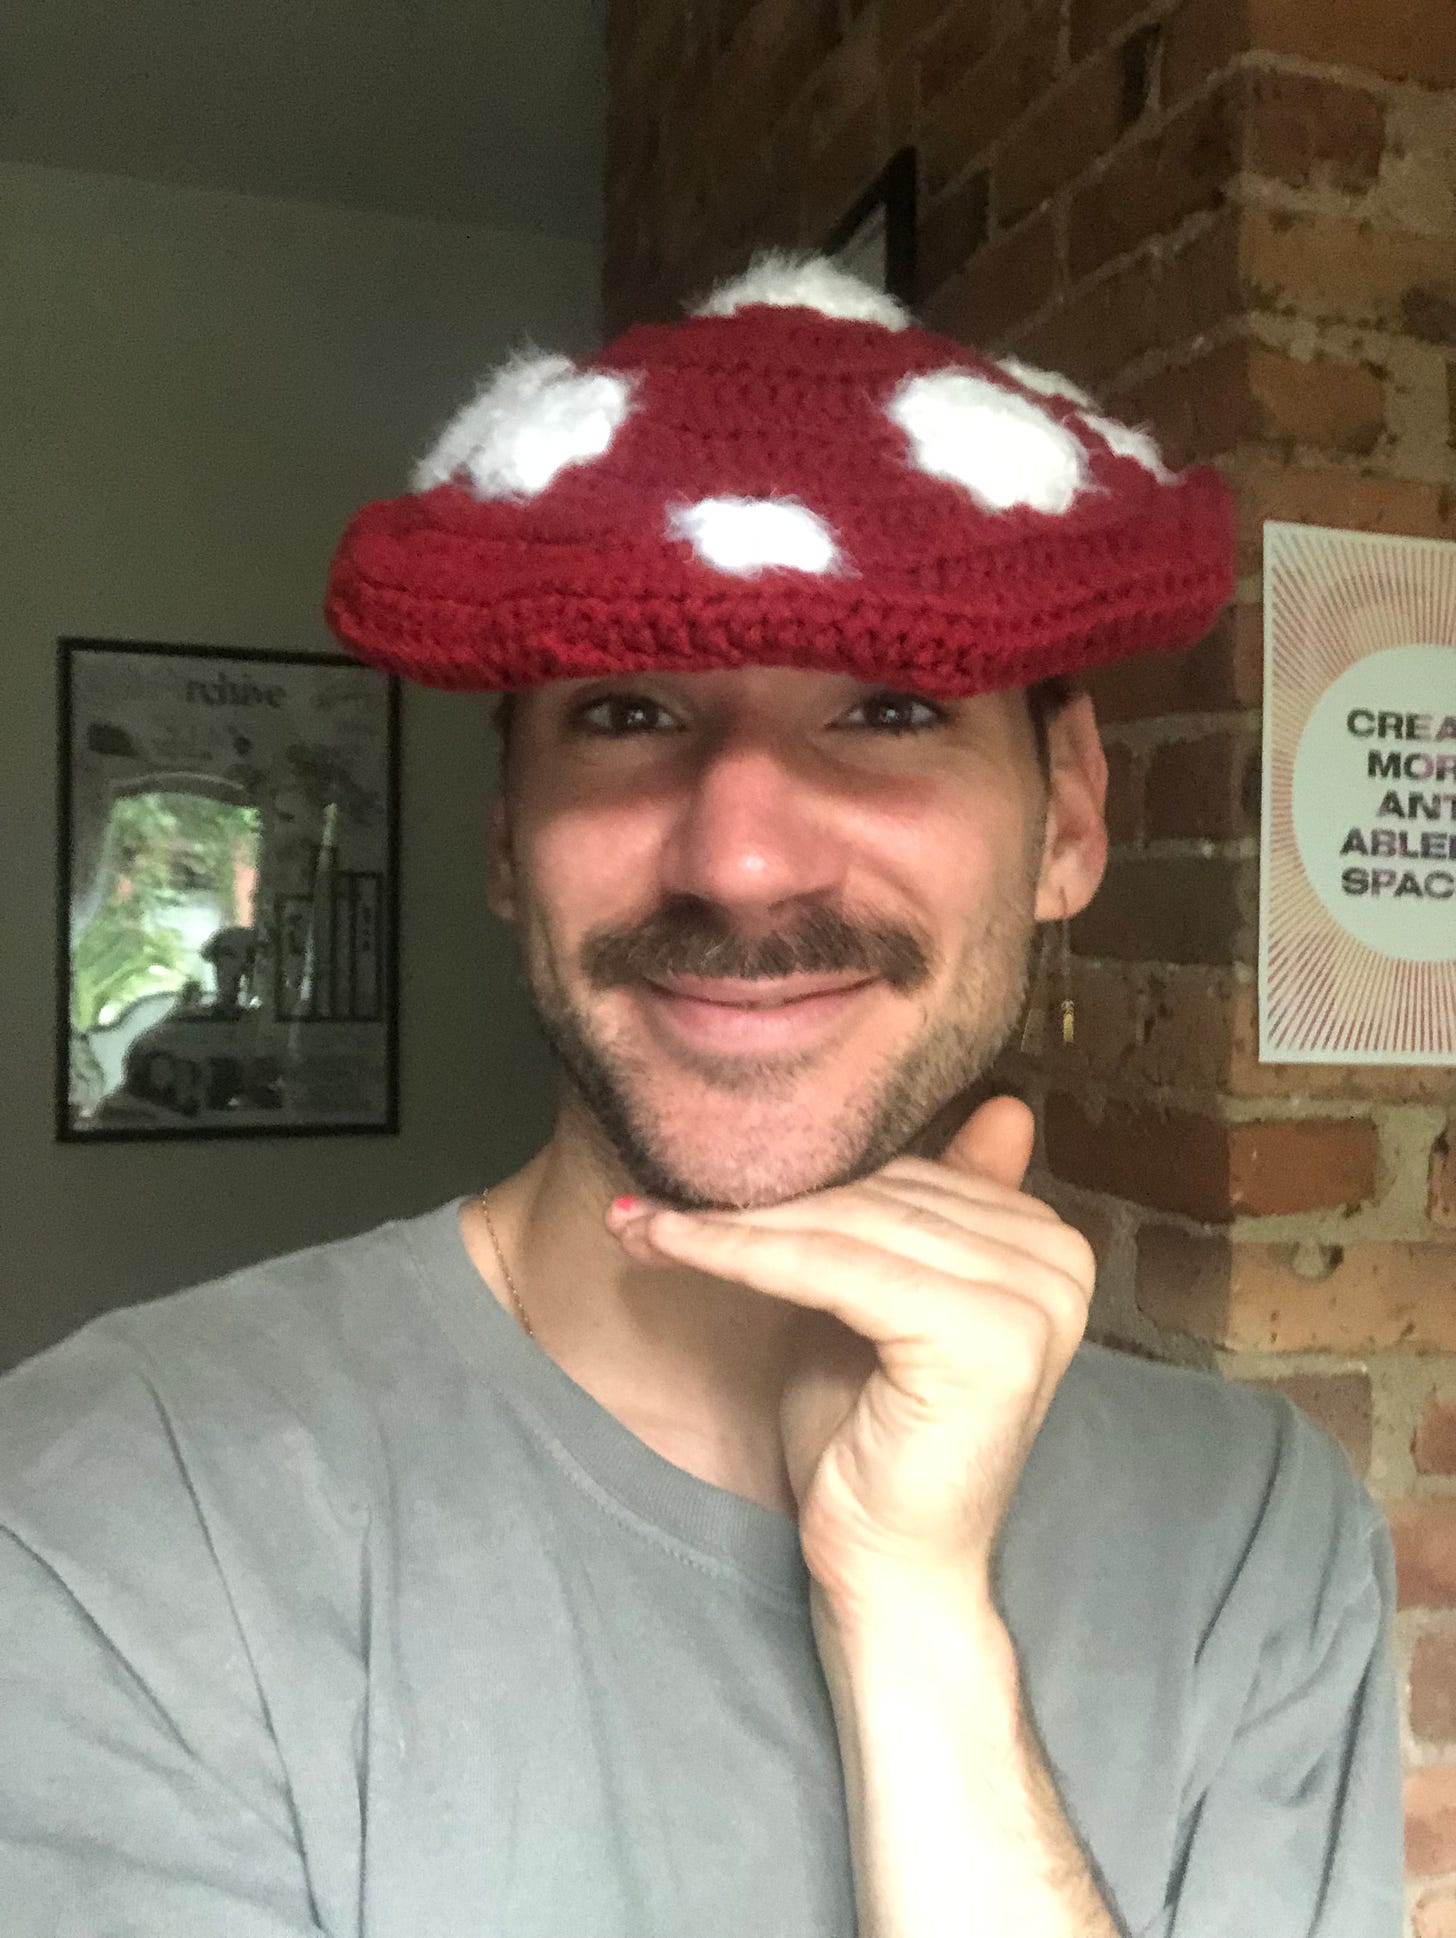 This is me! A scruffy white person with a mustache, wearing a red knit hat that looks like the doctoral tam that’s hanging not too far away in my home office on unceded Lenape land also known as Brooklyn. The hat is red and luxuriantly fuzzy white dots on top, making it look like the cartoonish ways magic mushrooms are often represented.